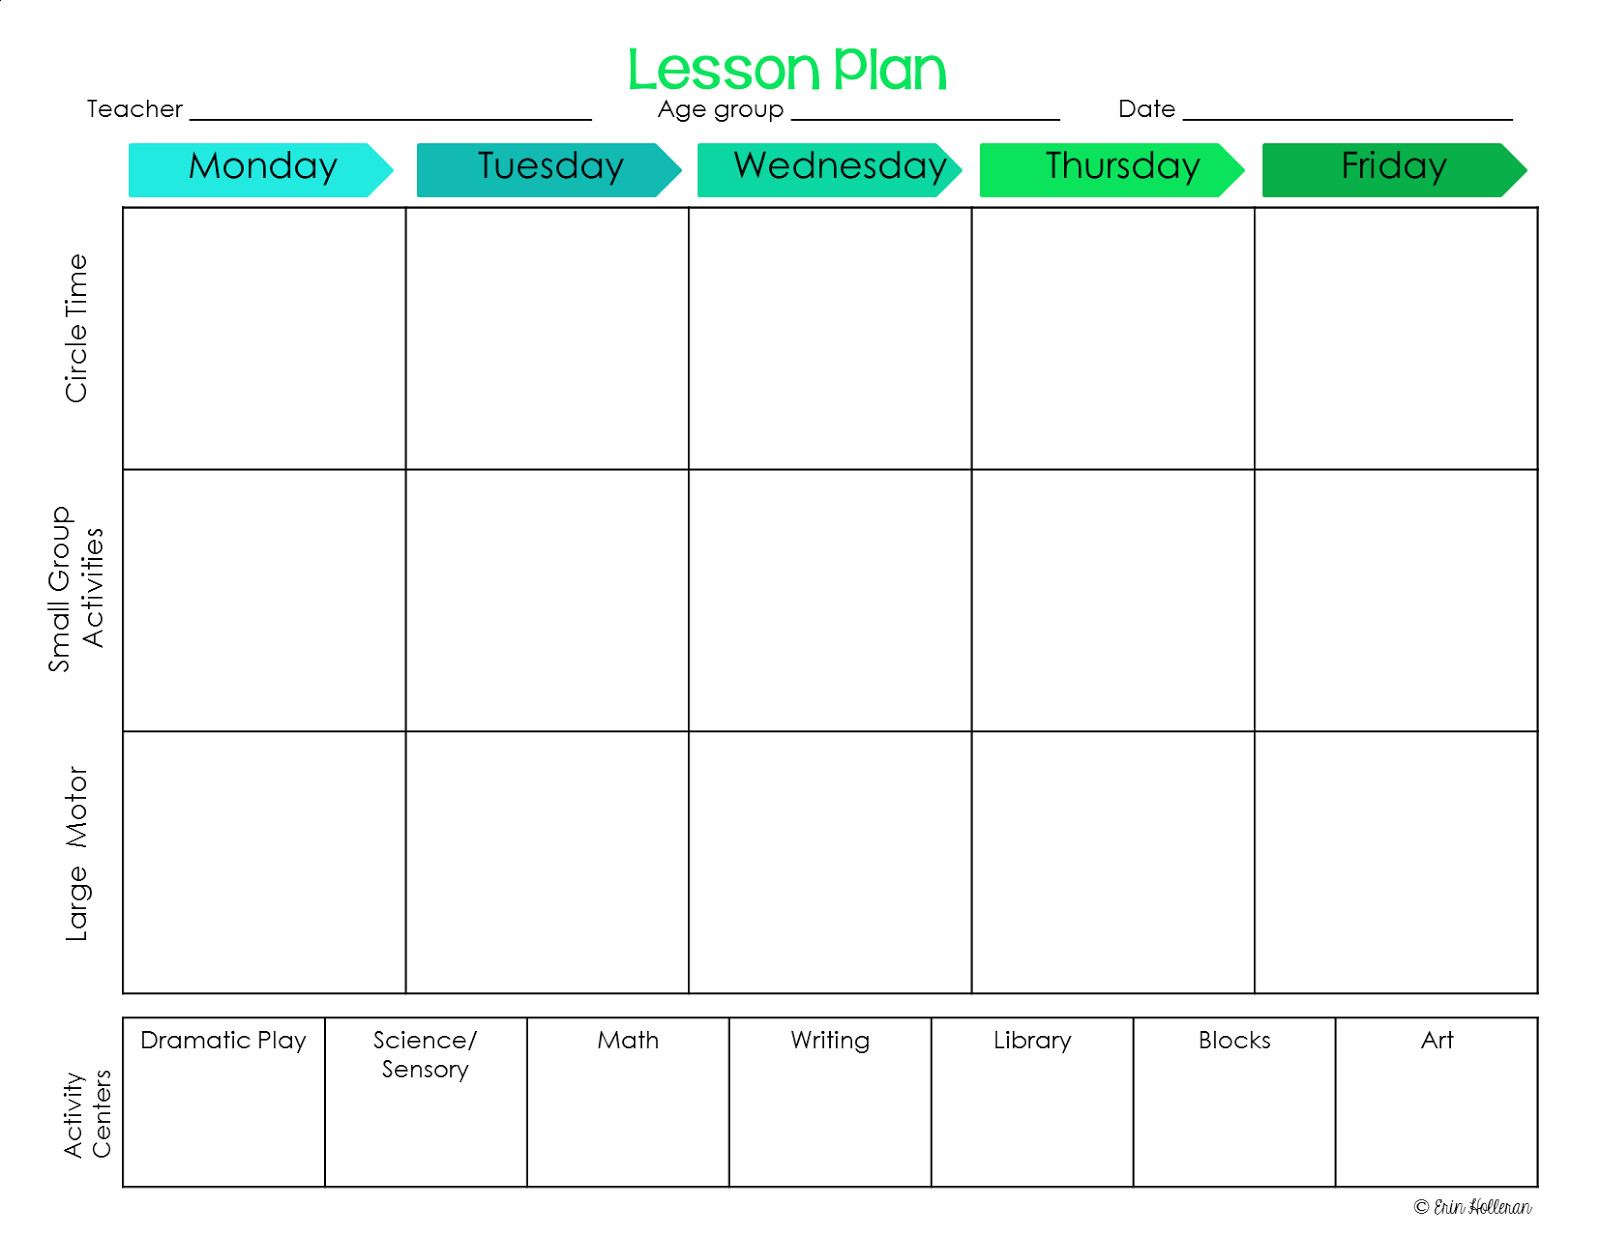 Scholastic Lesson Plans Preschool Ponderings Make Your Lesson Plans Work for You